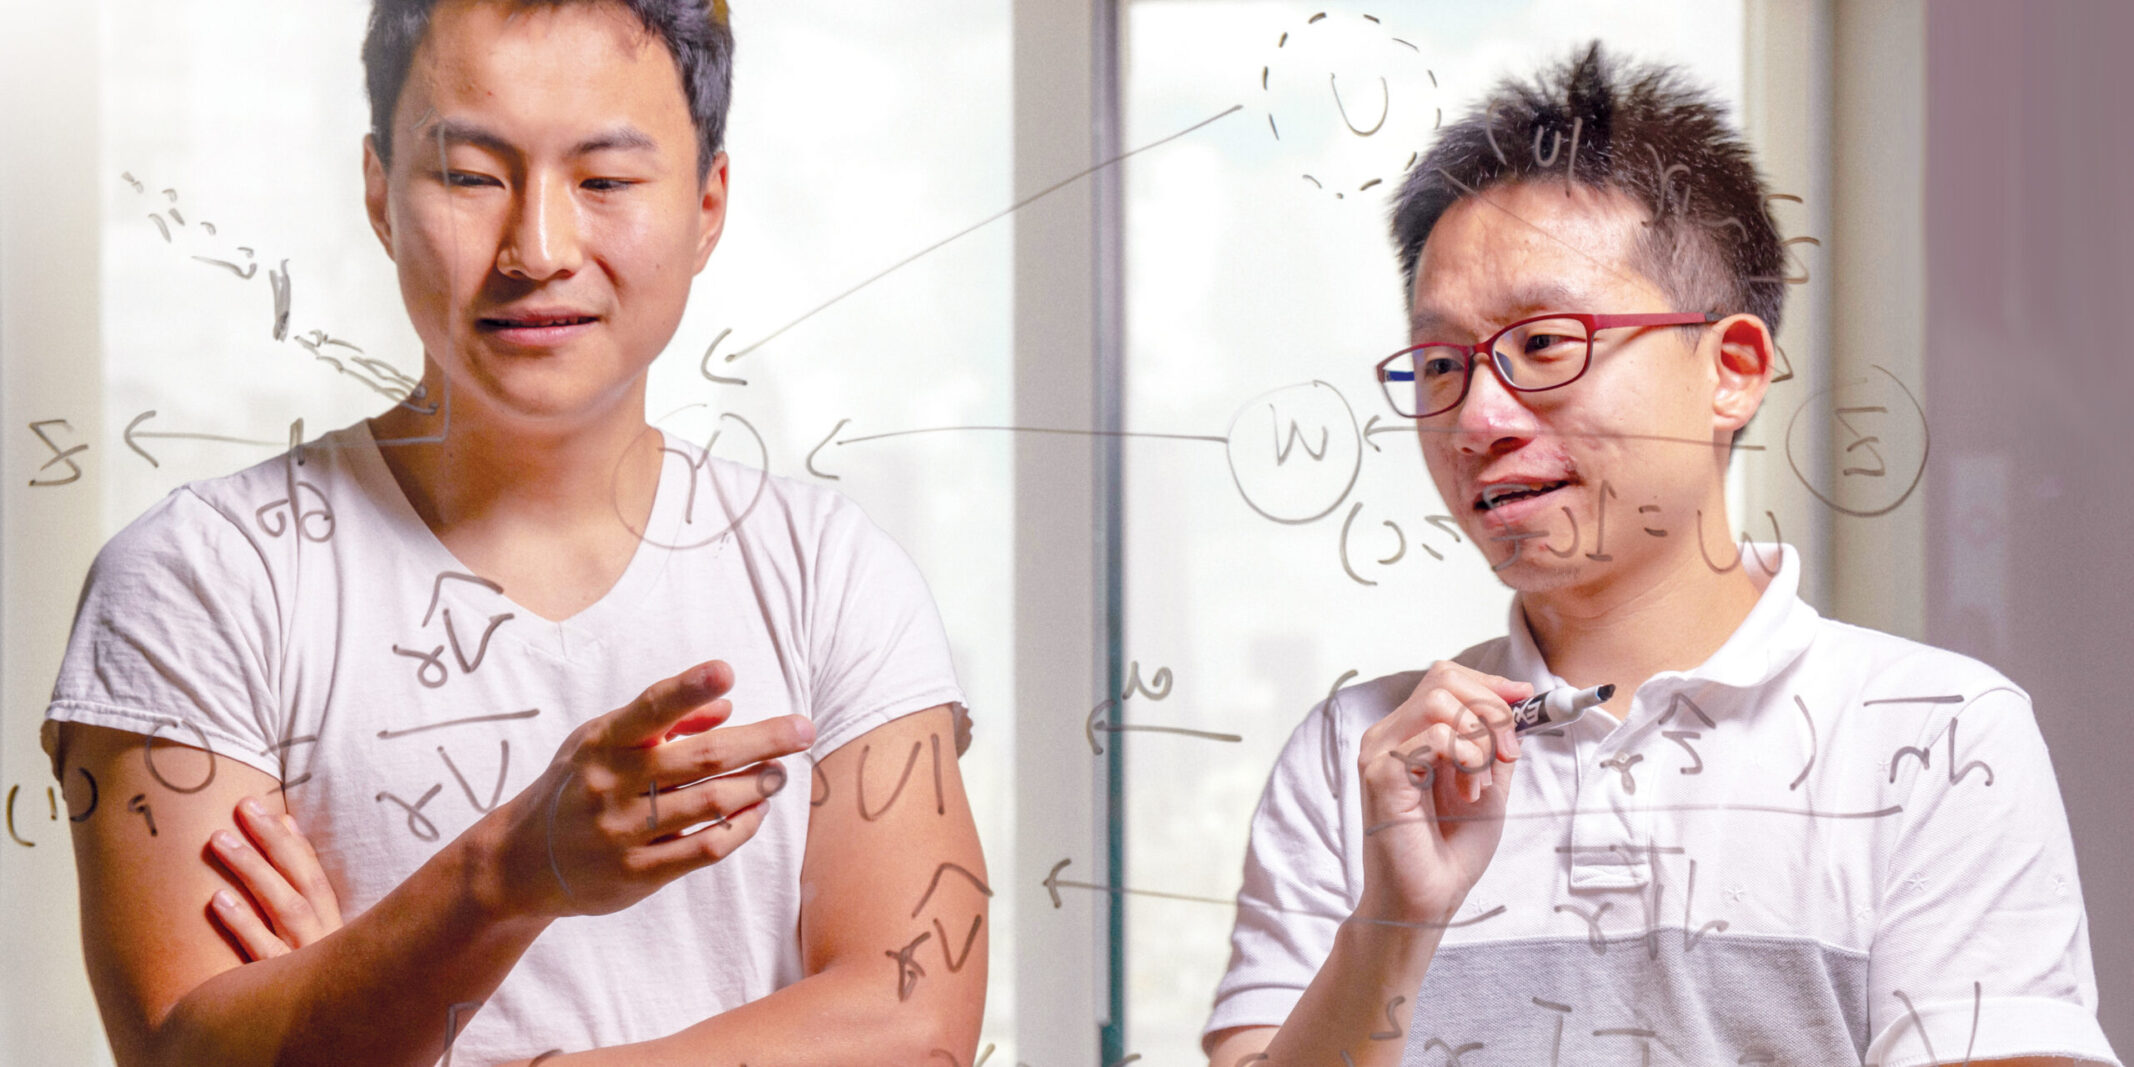 Two graduate students write equations on a glass whiteboard.